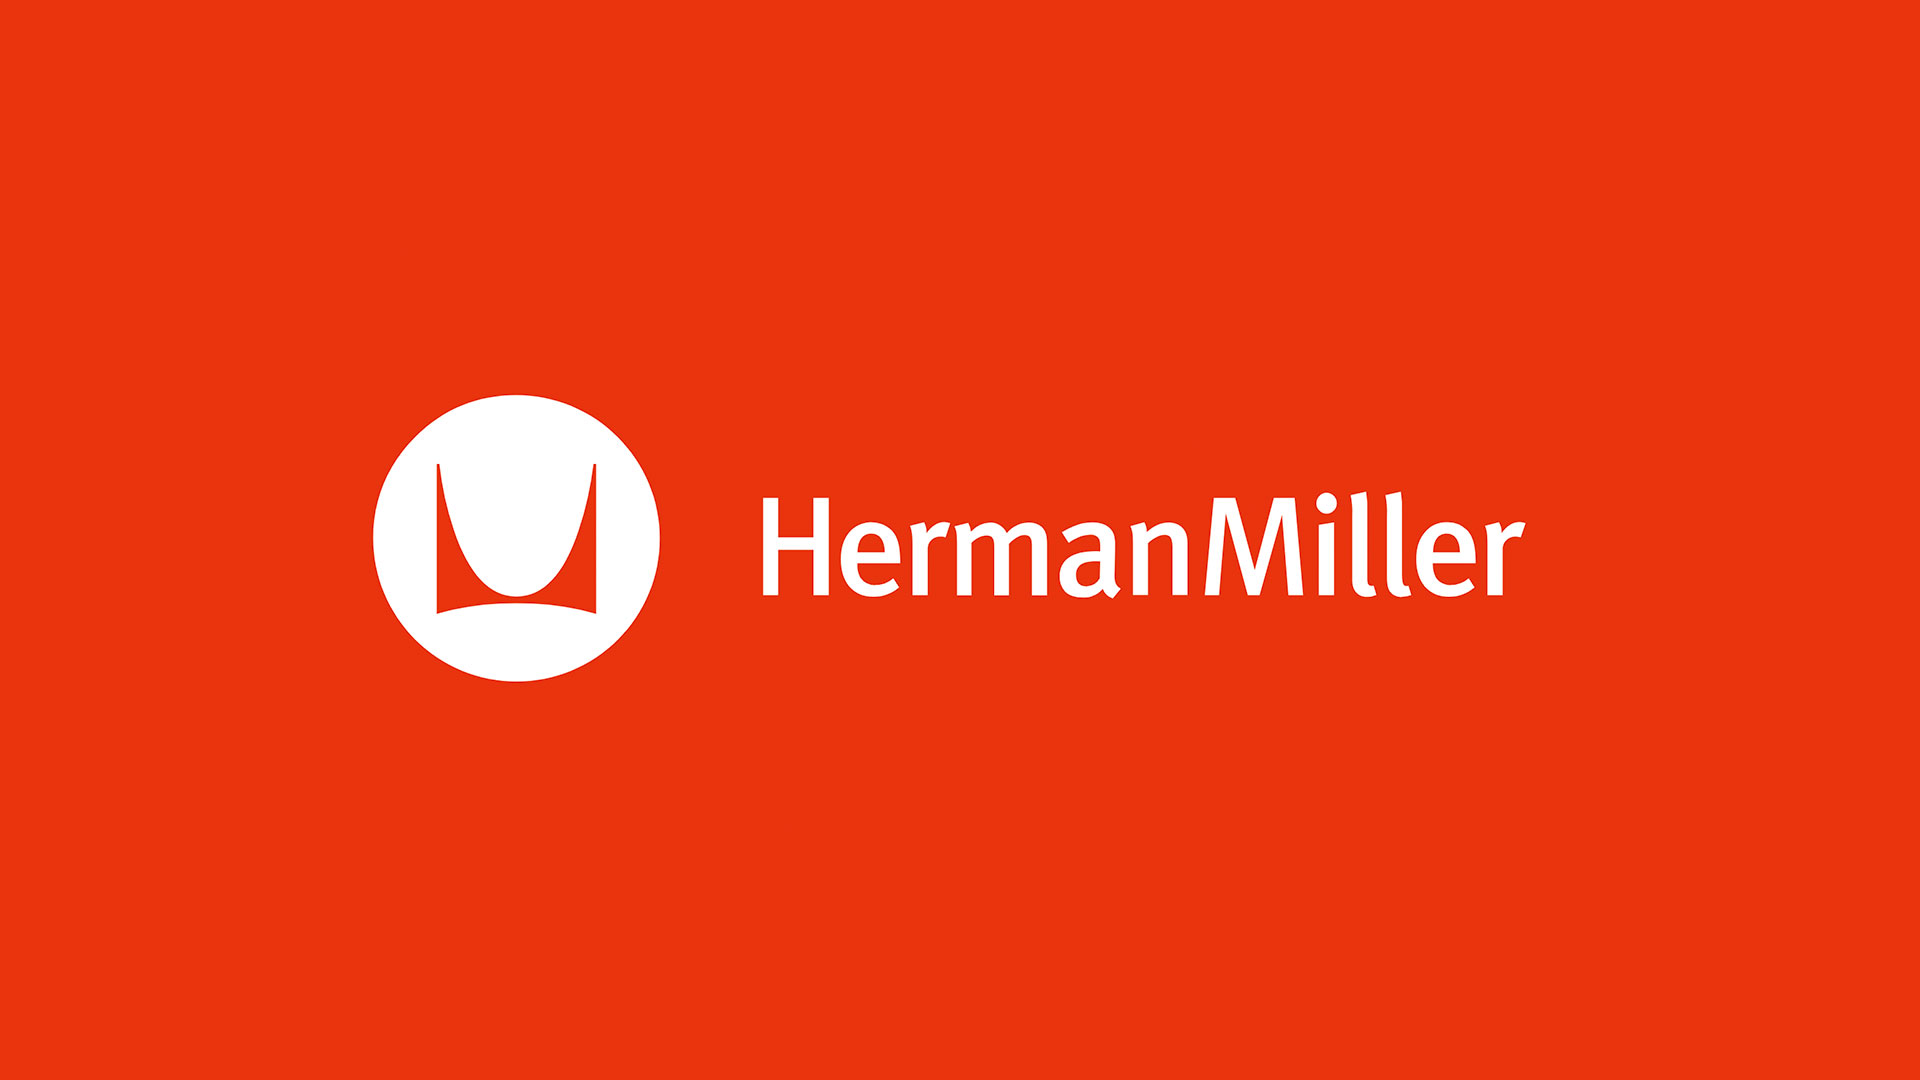 Herman Miller Expands European Gaming Business with Dedicated Gaming Webshops in Denmark, Finland and Sweden